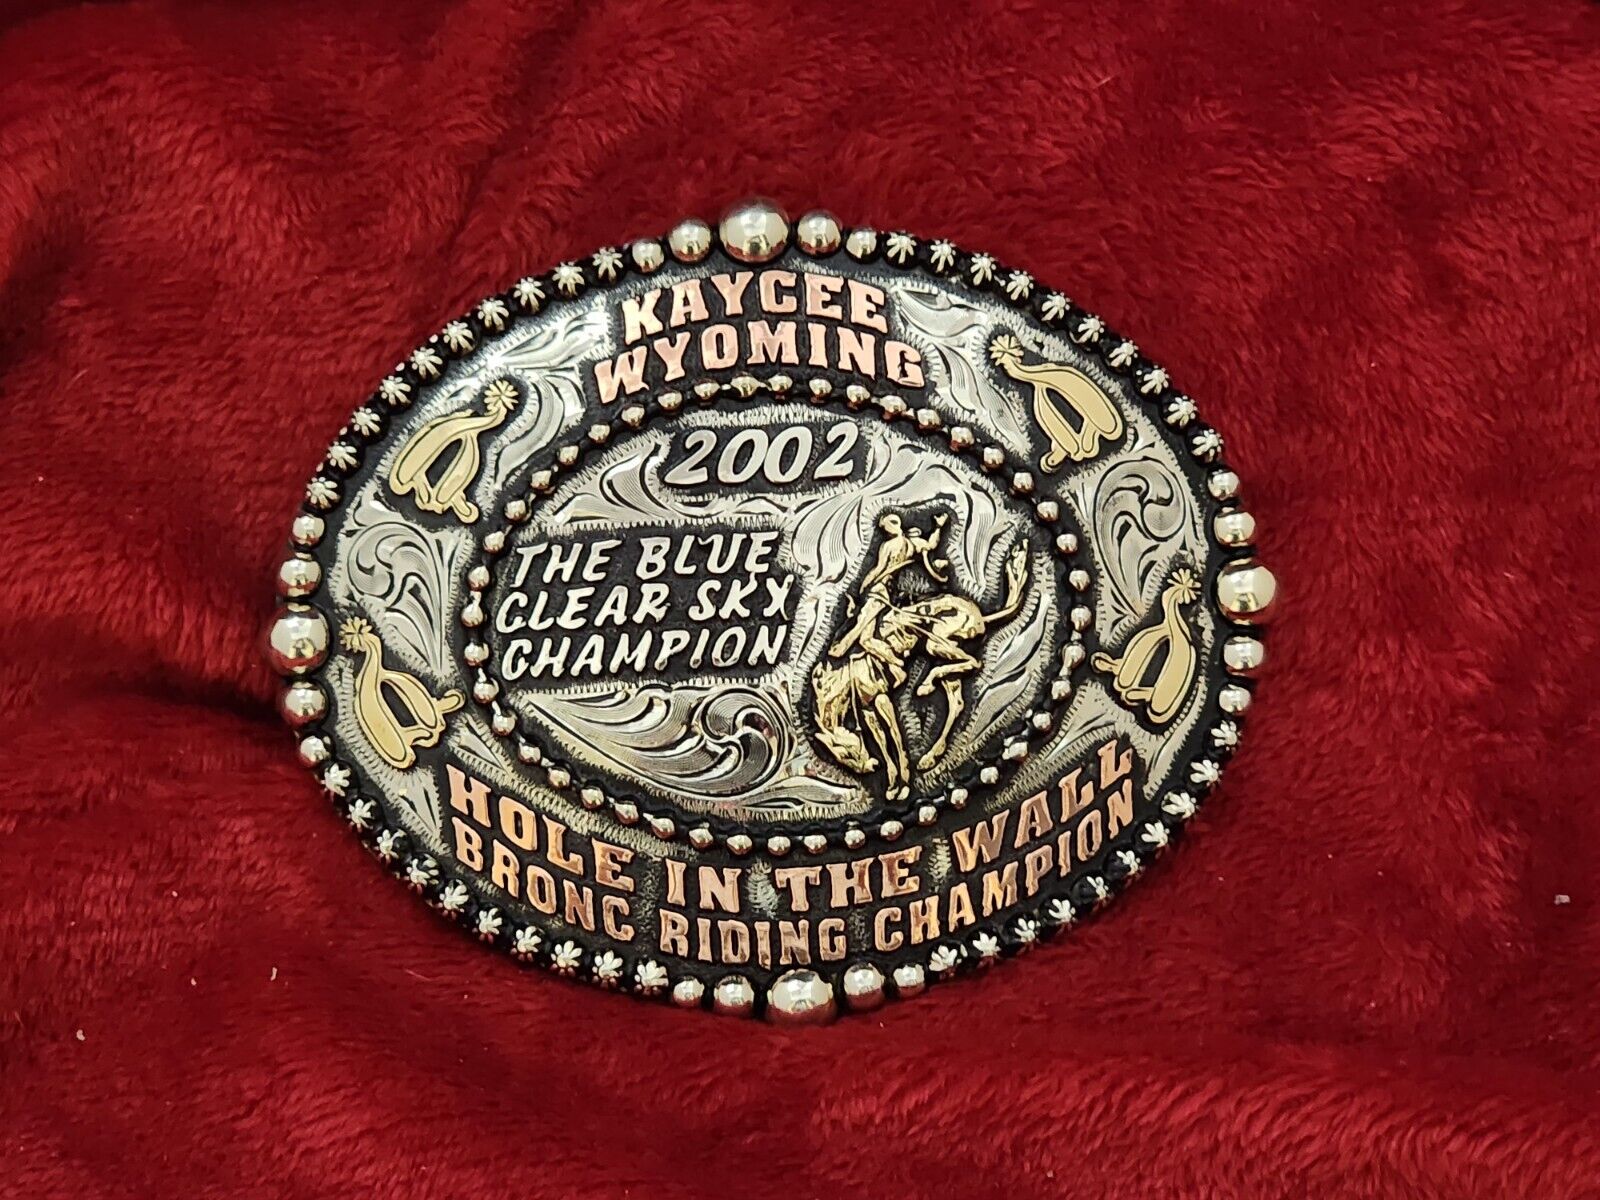 CHAMPION BRONC RIDING KAYCEE WY PROFESSIONAL RODEO TROPHY BUCKLE☆2002☆RARE☆975